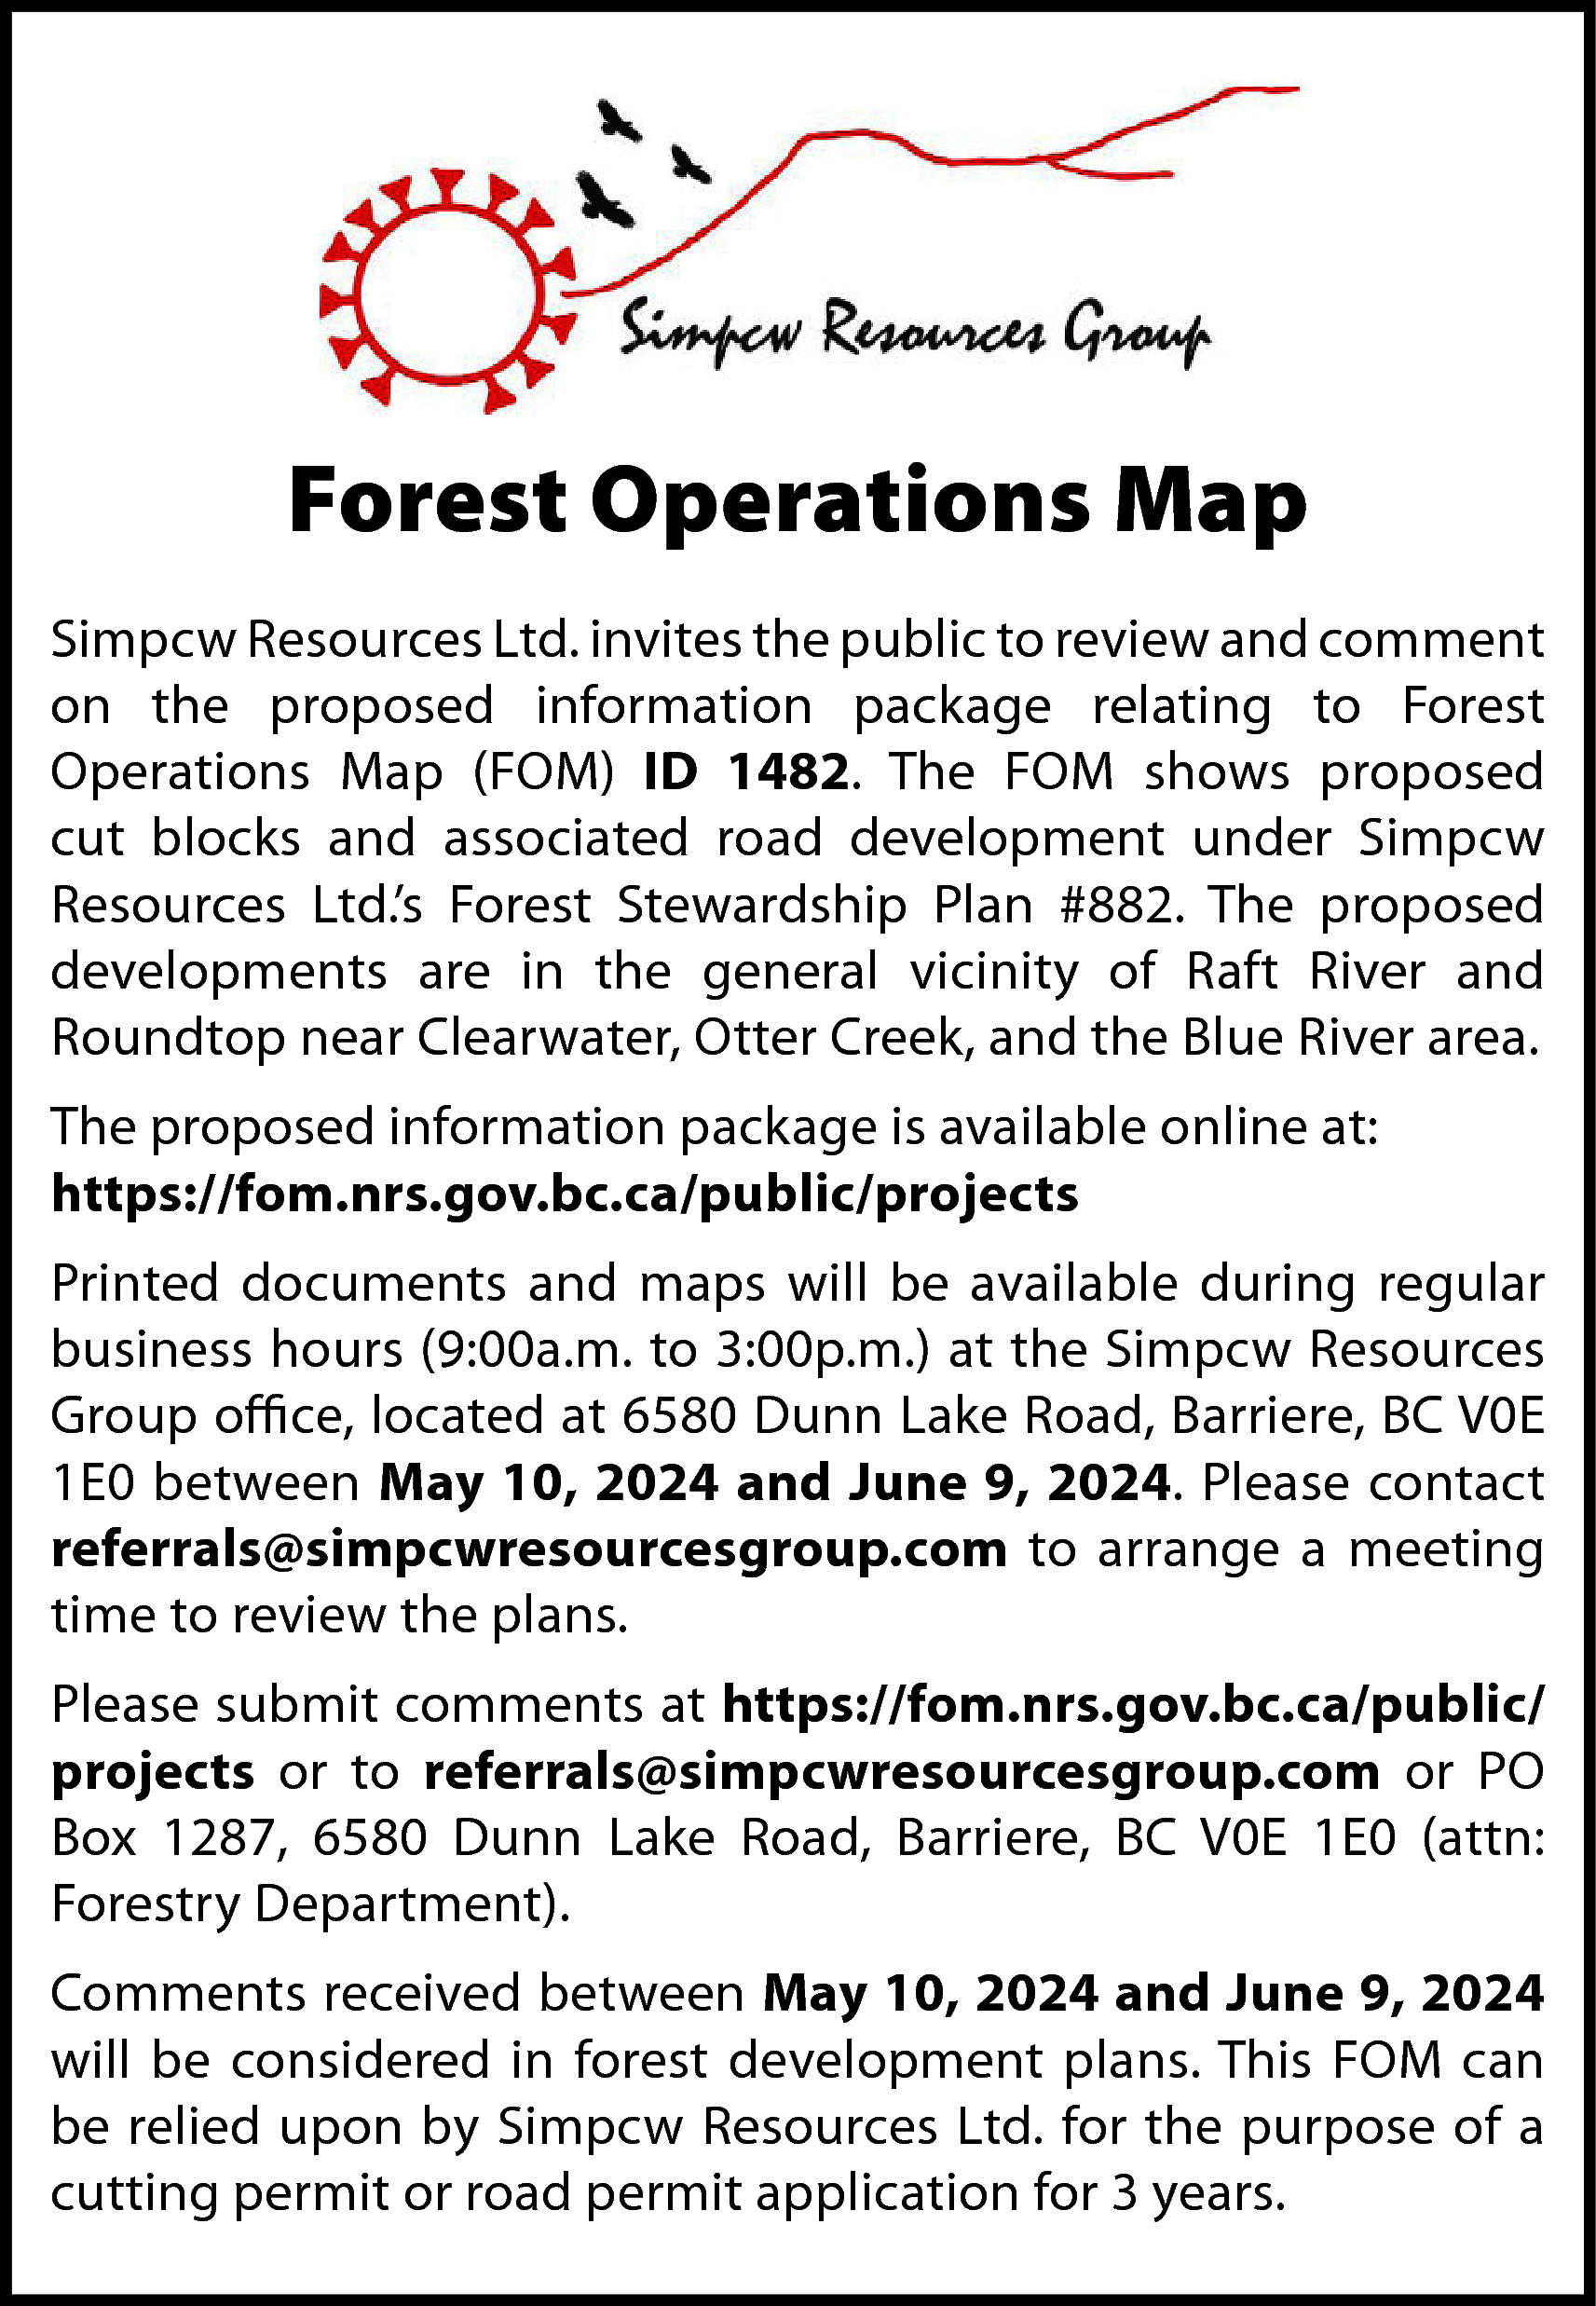 Forest Operations Map <br>Simpcw Resources  Forest Operations Map  Simpcw Resources Ltd. invites the public to review and comment  on the proposed information package relating to Forest  Operations Map (FOM) ID 1482. The FOM shows proposed  cut blocks and associated road development under Simpcw  Resources Ltd.’s Forest Stewardship Plan #882. The proposed  developments are in the general vicinity of Raft River and  Roundtop near Clearwater, Otter Creek, and the Blue River area.  The proposed information package is available online at:  https://fom.nrs.gov.bc.ca/public/projects  Printed documents and maps will be available during regular  business hours (9:00a.m. to 3:00p.m.) at the Simpcw Resources  Group office, located at 6580 Dunn Lake Road, Barriere, BC V0E  1E0 between May 10, 2024 and June 9, 2024. Please contact  referrals@simpcwresourcesgroup.com to arrange a meeting  time to review the plans.  Please submit comments at https://fom.nrs.gov.bc.ca/public/  projects or to referrals@simpcwresourcesgroup.com or PO  Box 1287, 6580 Dunn Lake Road, Barriere, BC V0E 1E0 (attn:  Forestry Department).  Comments received between May 10, 2024 and June 9, 2024  will be considered in forest development plans. This FOM can  be relied upon by Simpcw Resources Ltd. for the purpose of a  cutting permit or road permit application for 3 years.    